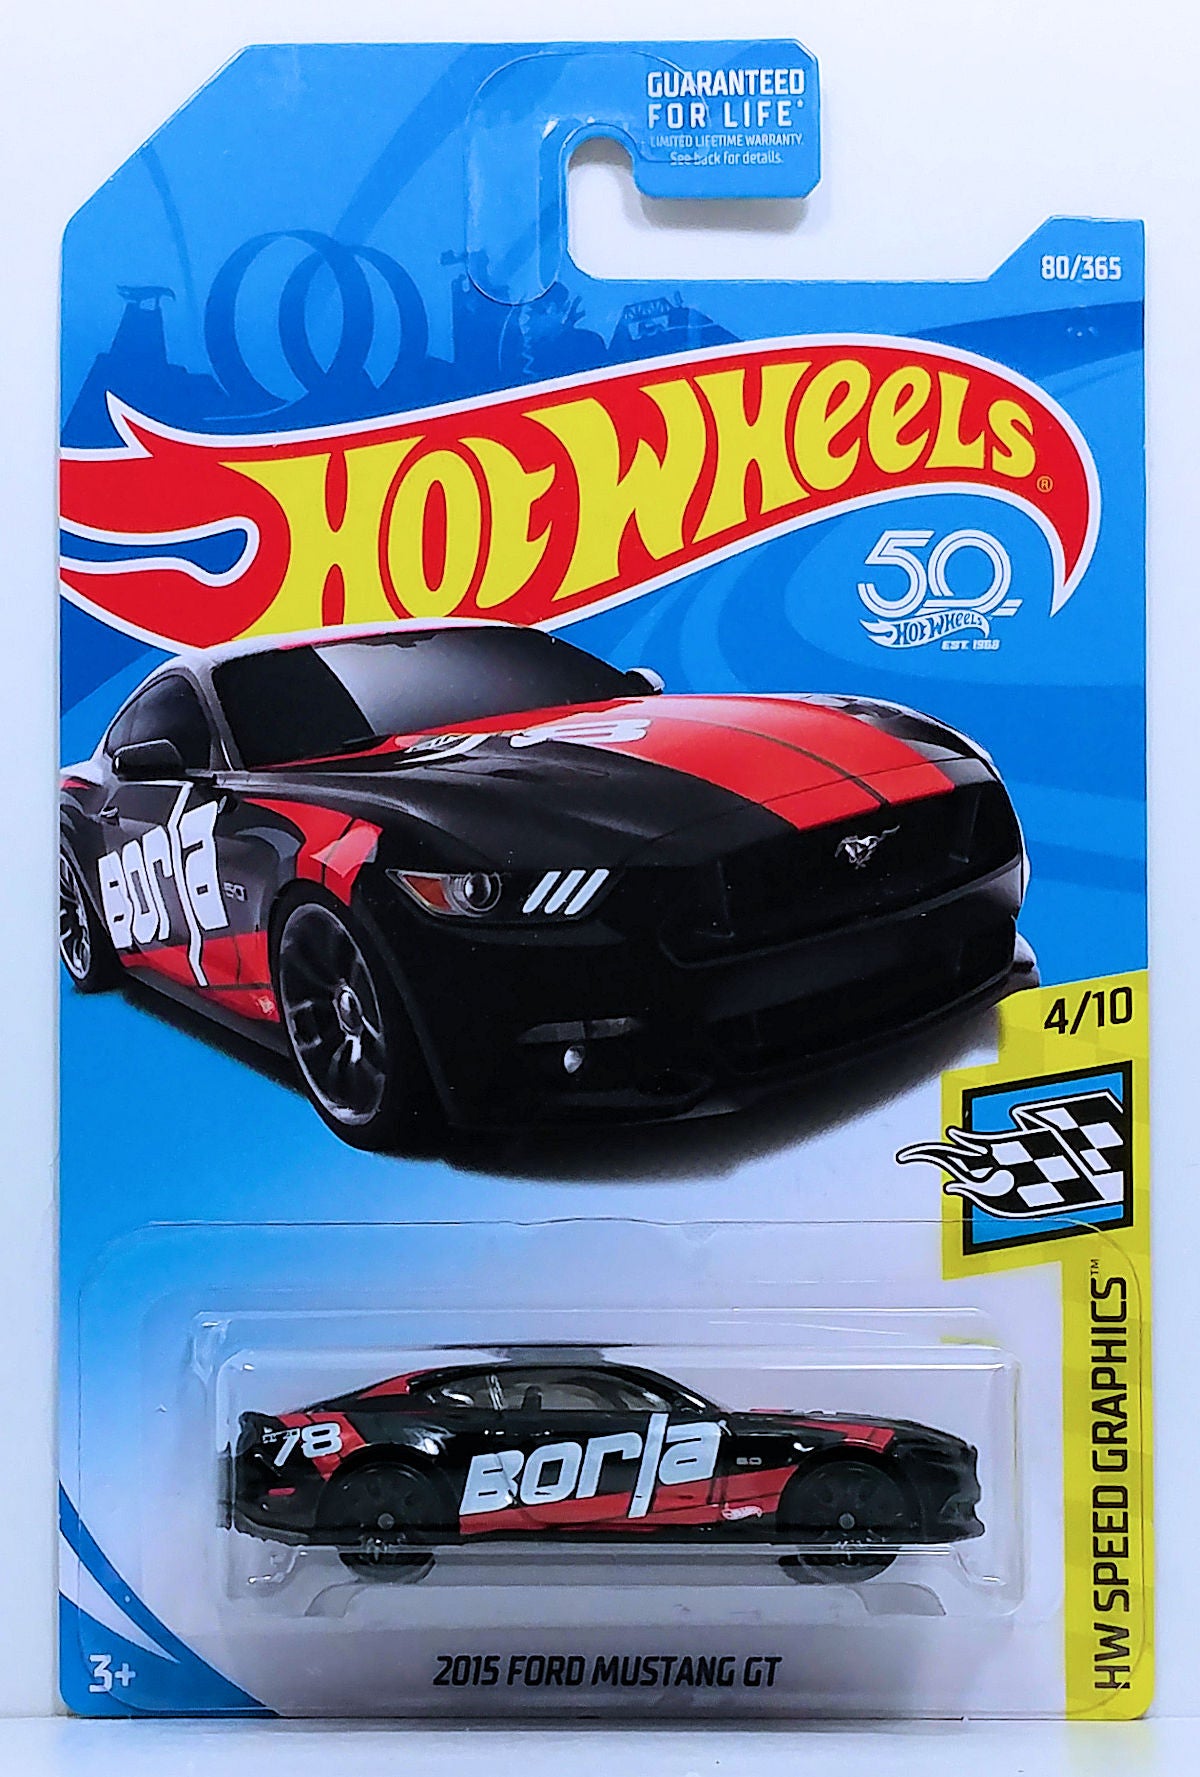 Hot Wheels 2018 - Collector #  080/365 - HW Speed Graphics 4/10 - 2015 Ford Mustang GT - Black - Borla